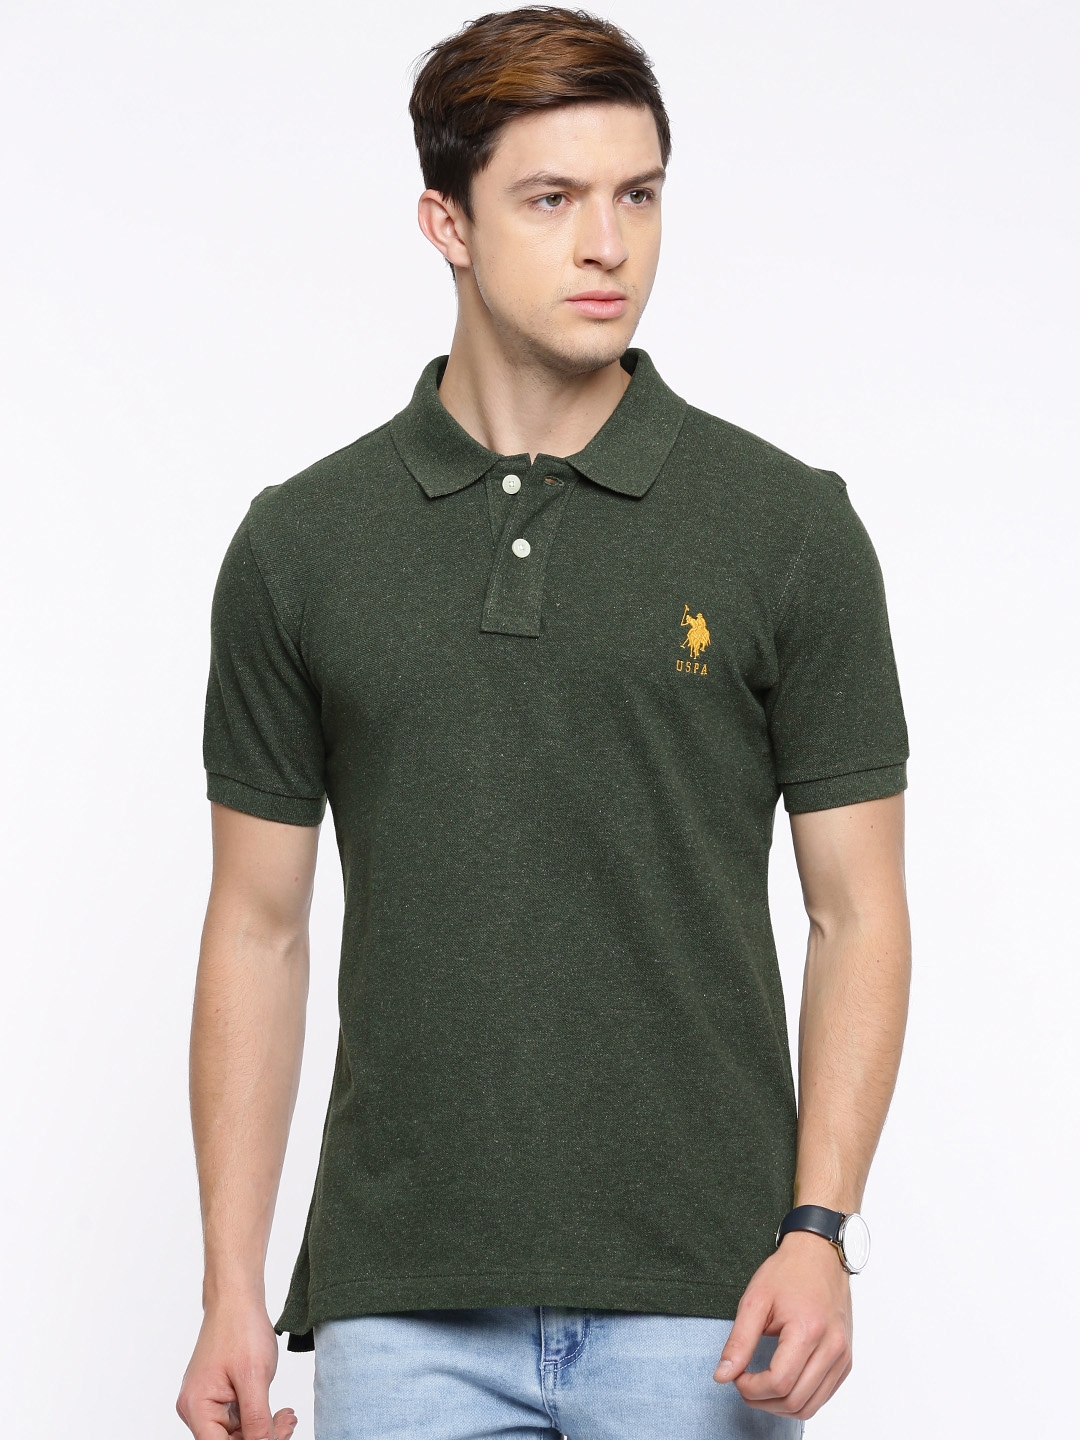 olive green polo shirt